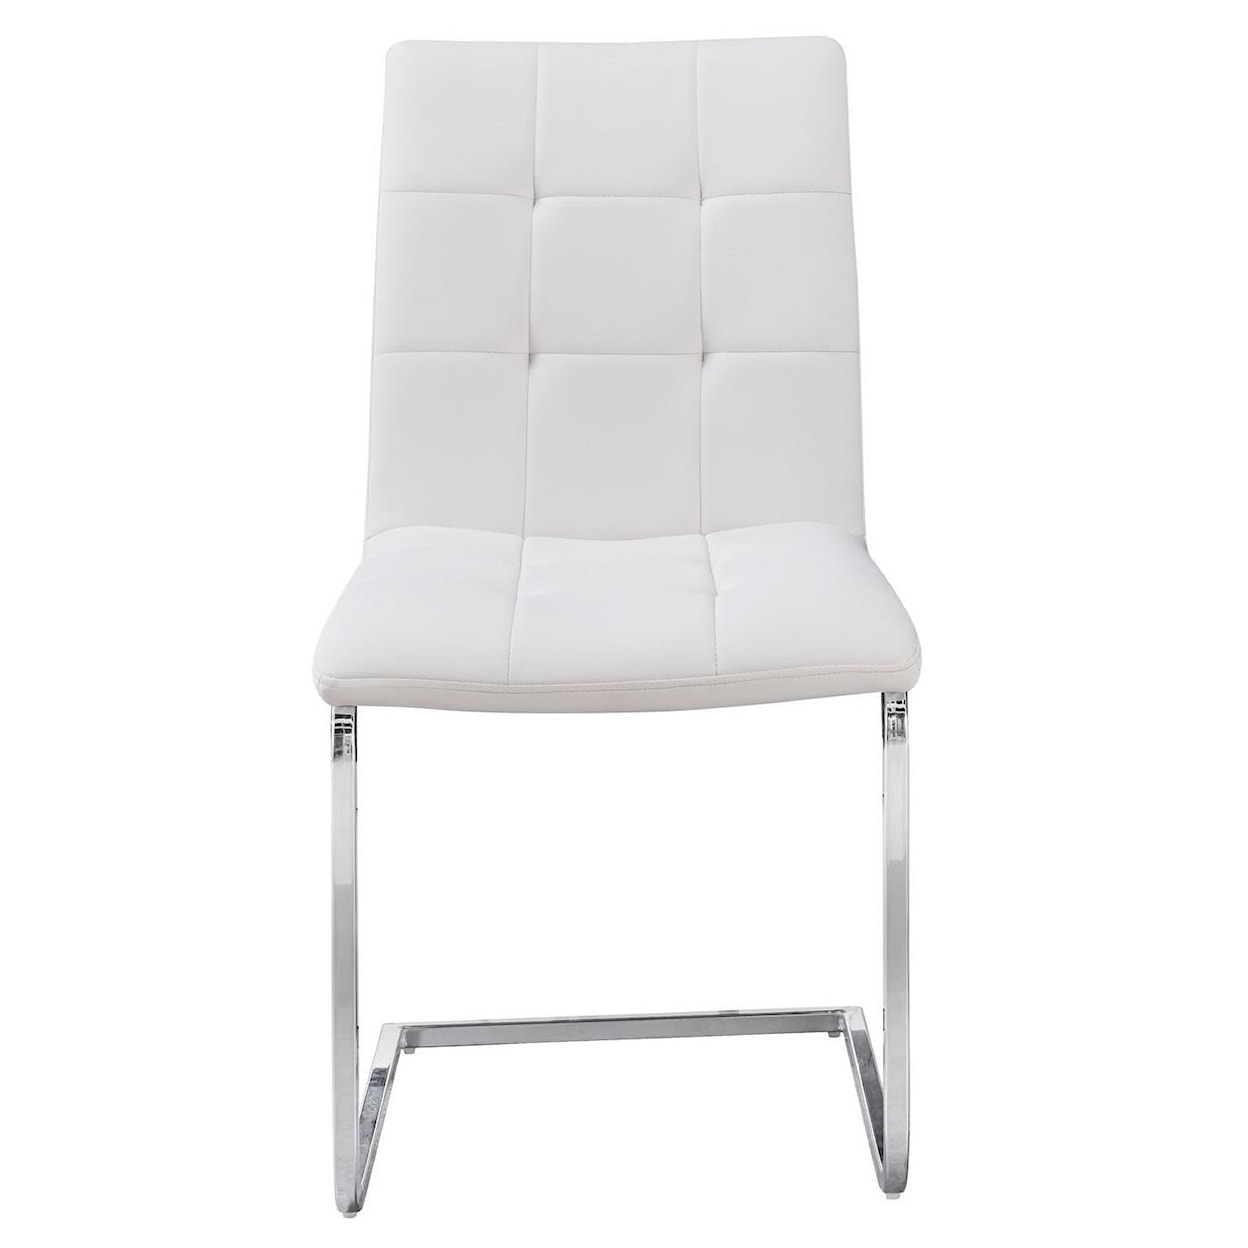 Prime Escondido Dining Side Chair